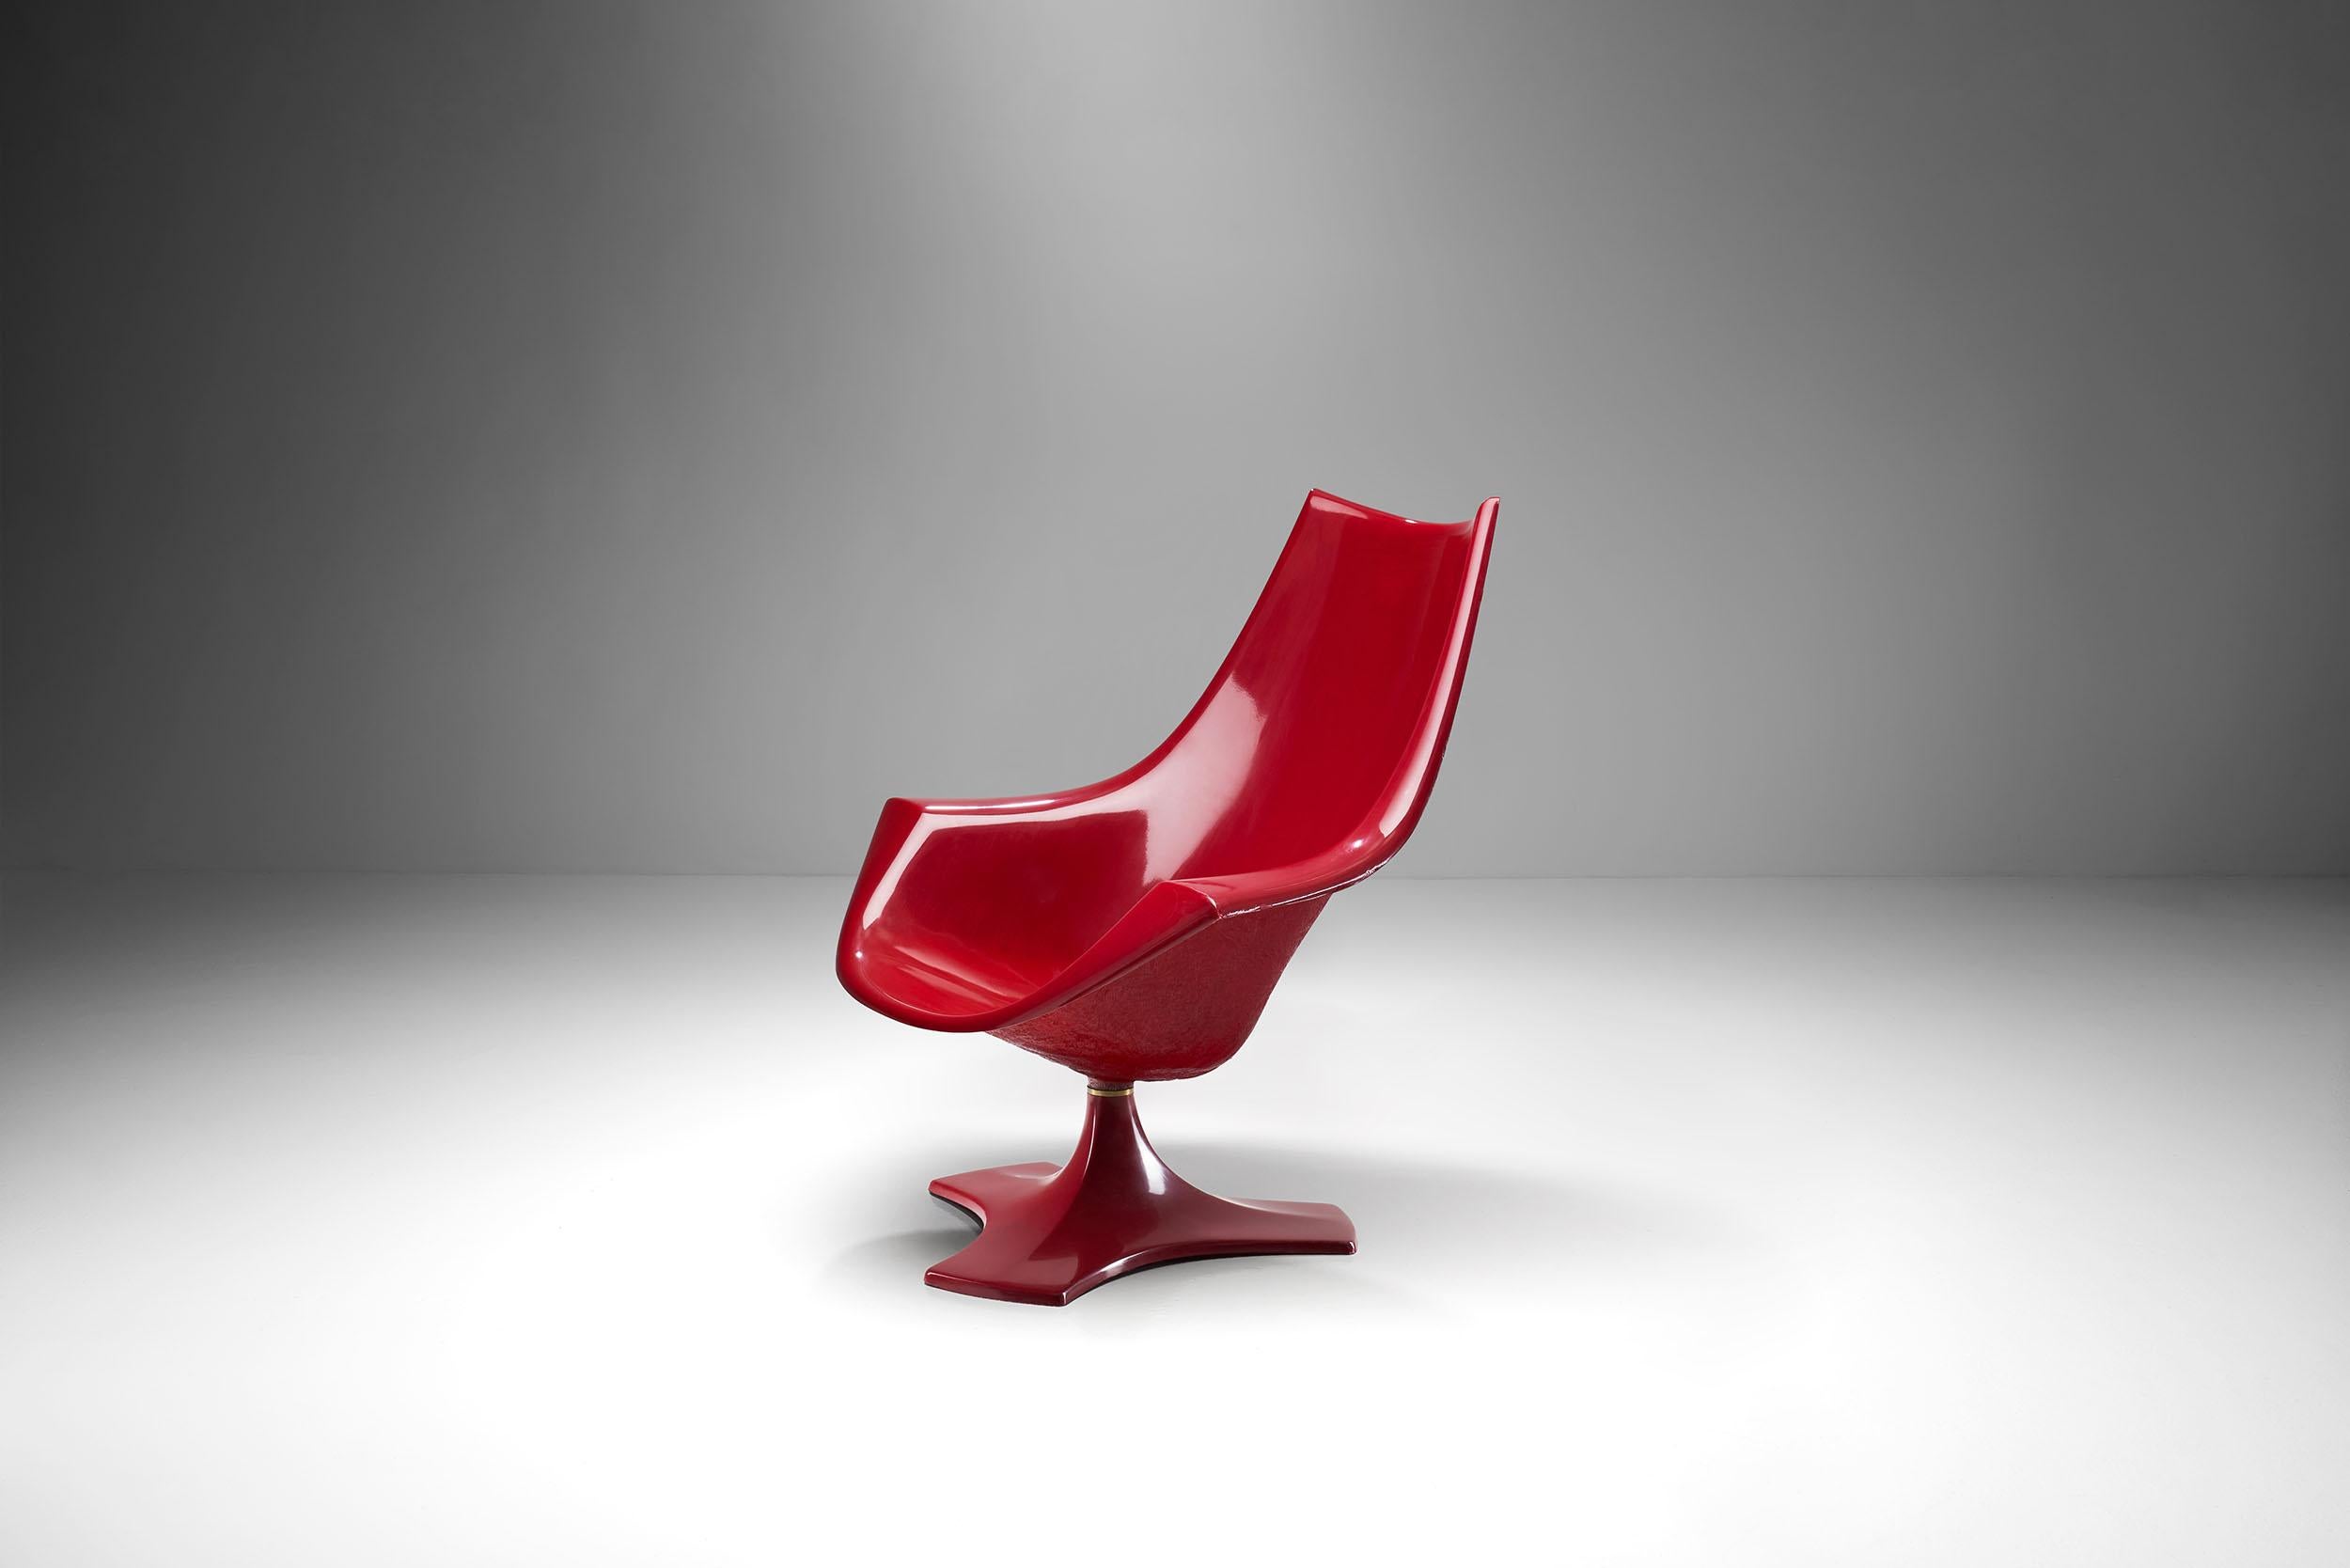 The “Amicus” armchair by Antero Poppius, was designed in Finland in the 1970s. This typical 1970s chair consists of a moulded fibreglass shell that stands on a single base connecting the two parts of the armchair and comes with a swivel function.